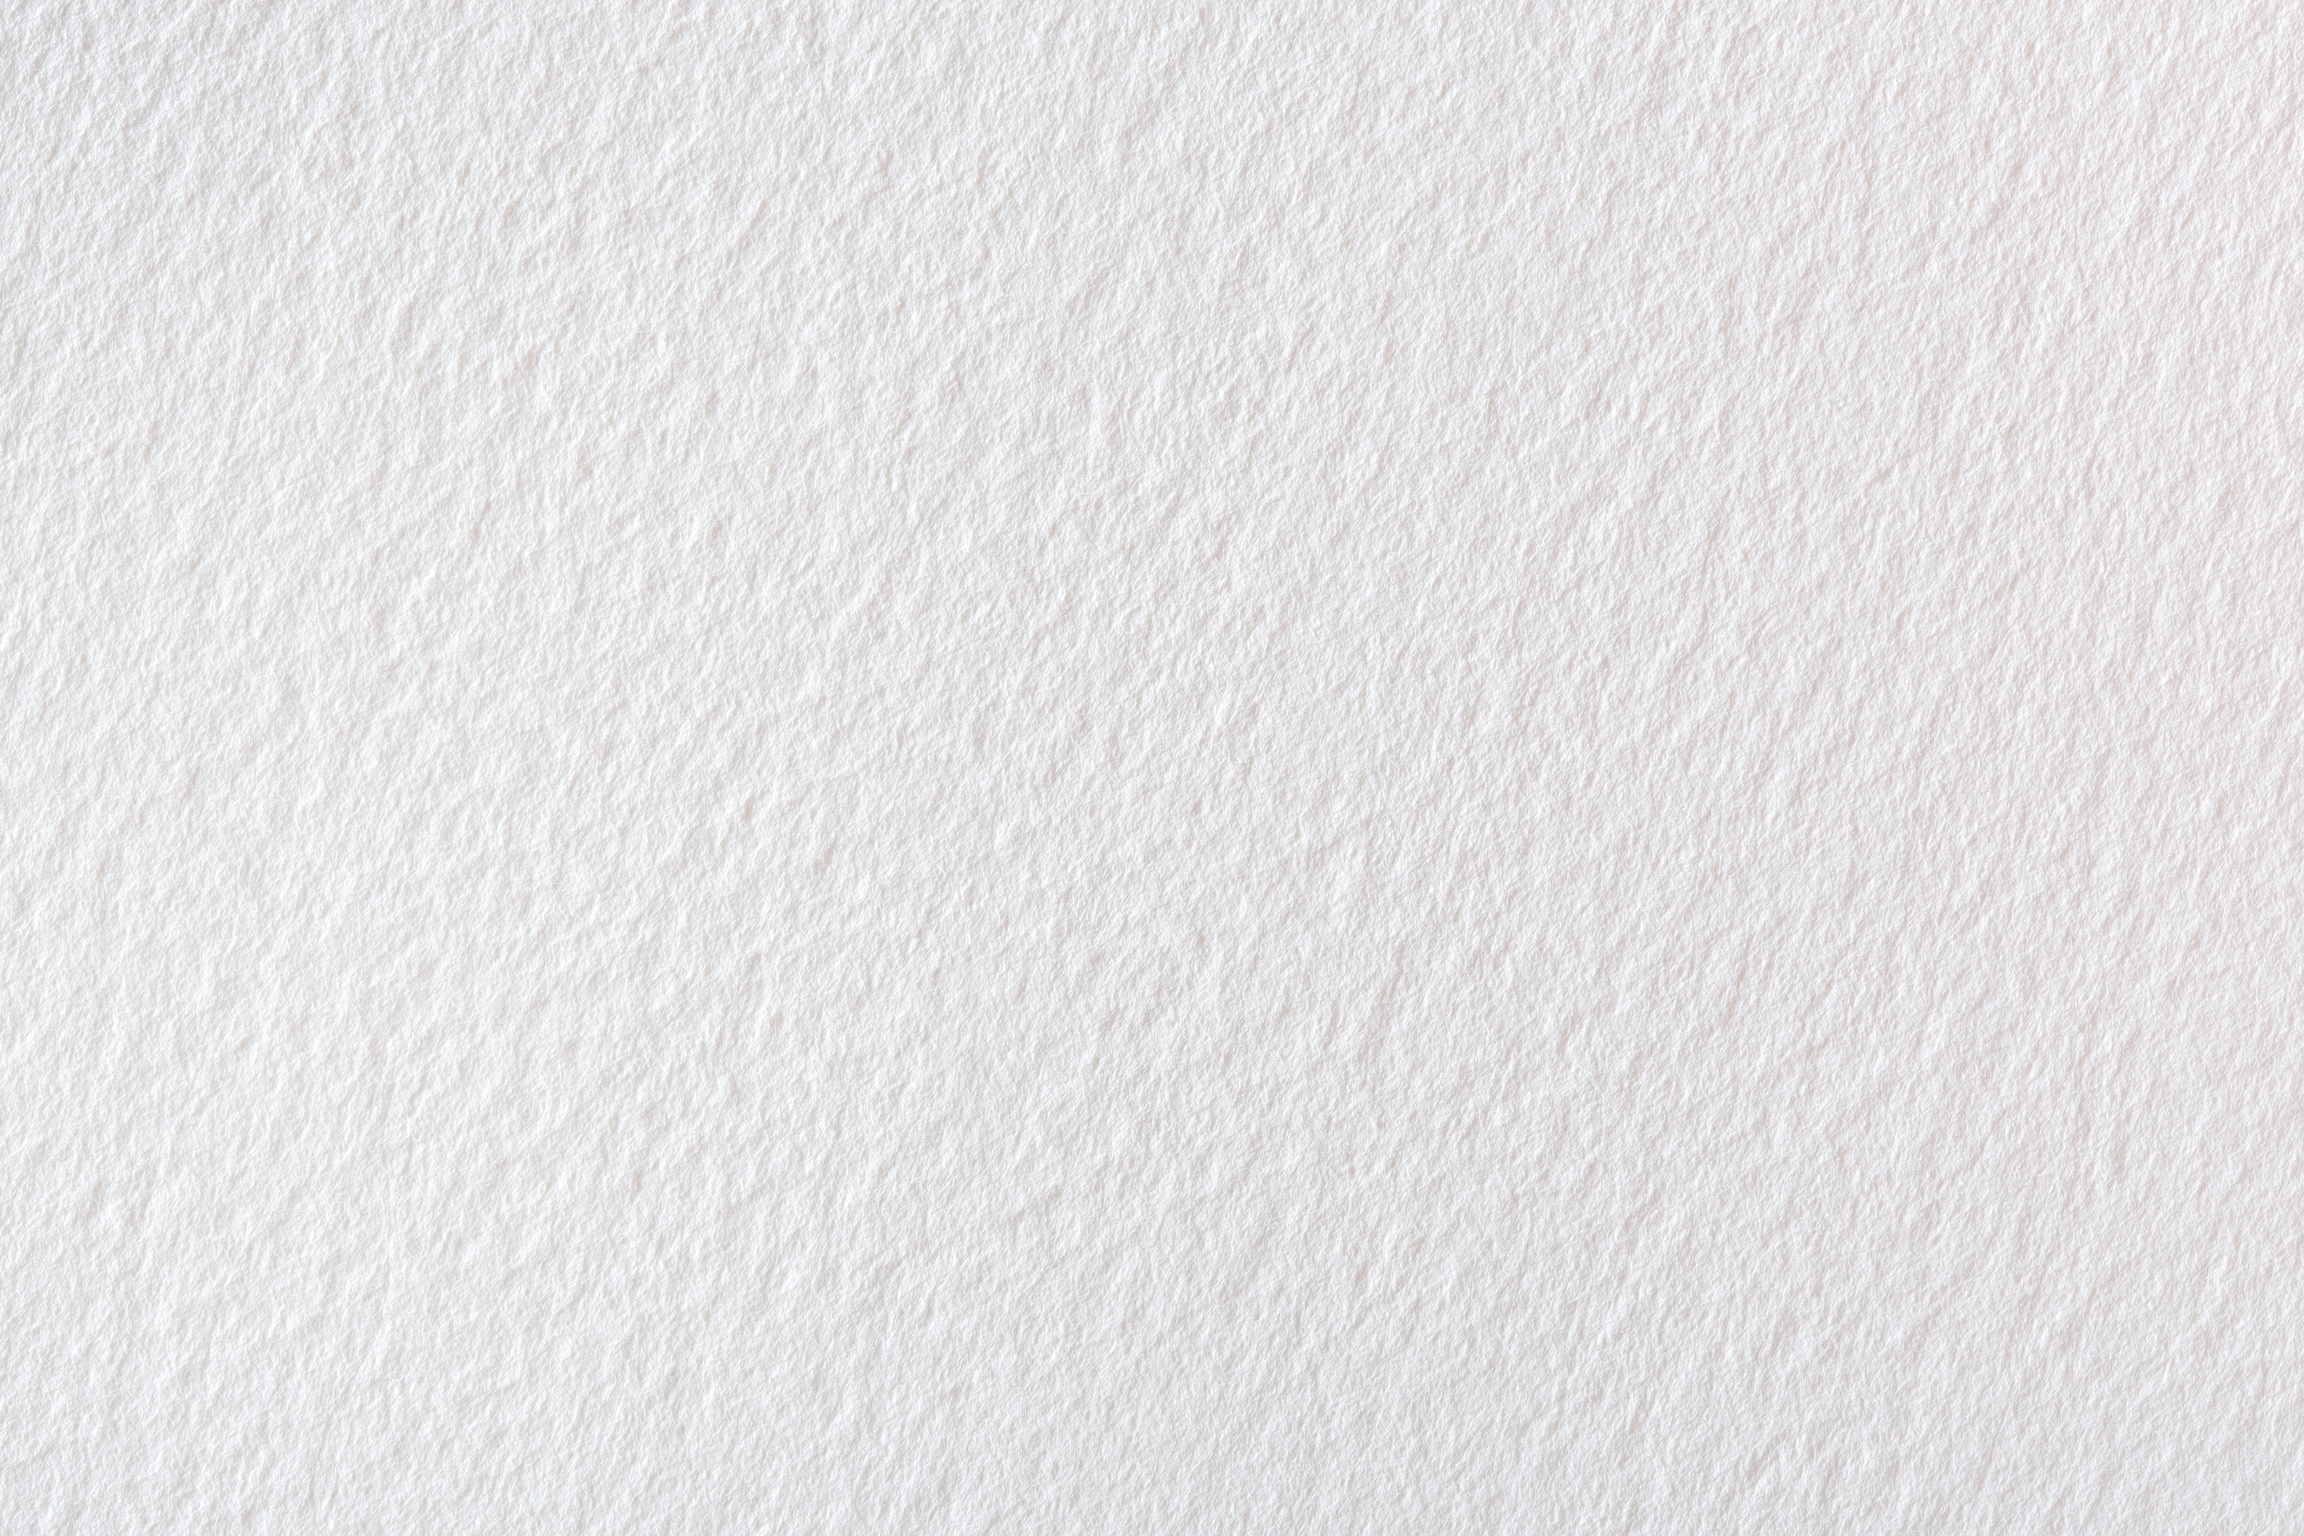 High quality white paper texture, paper background.